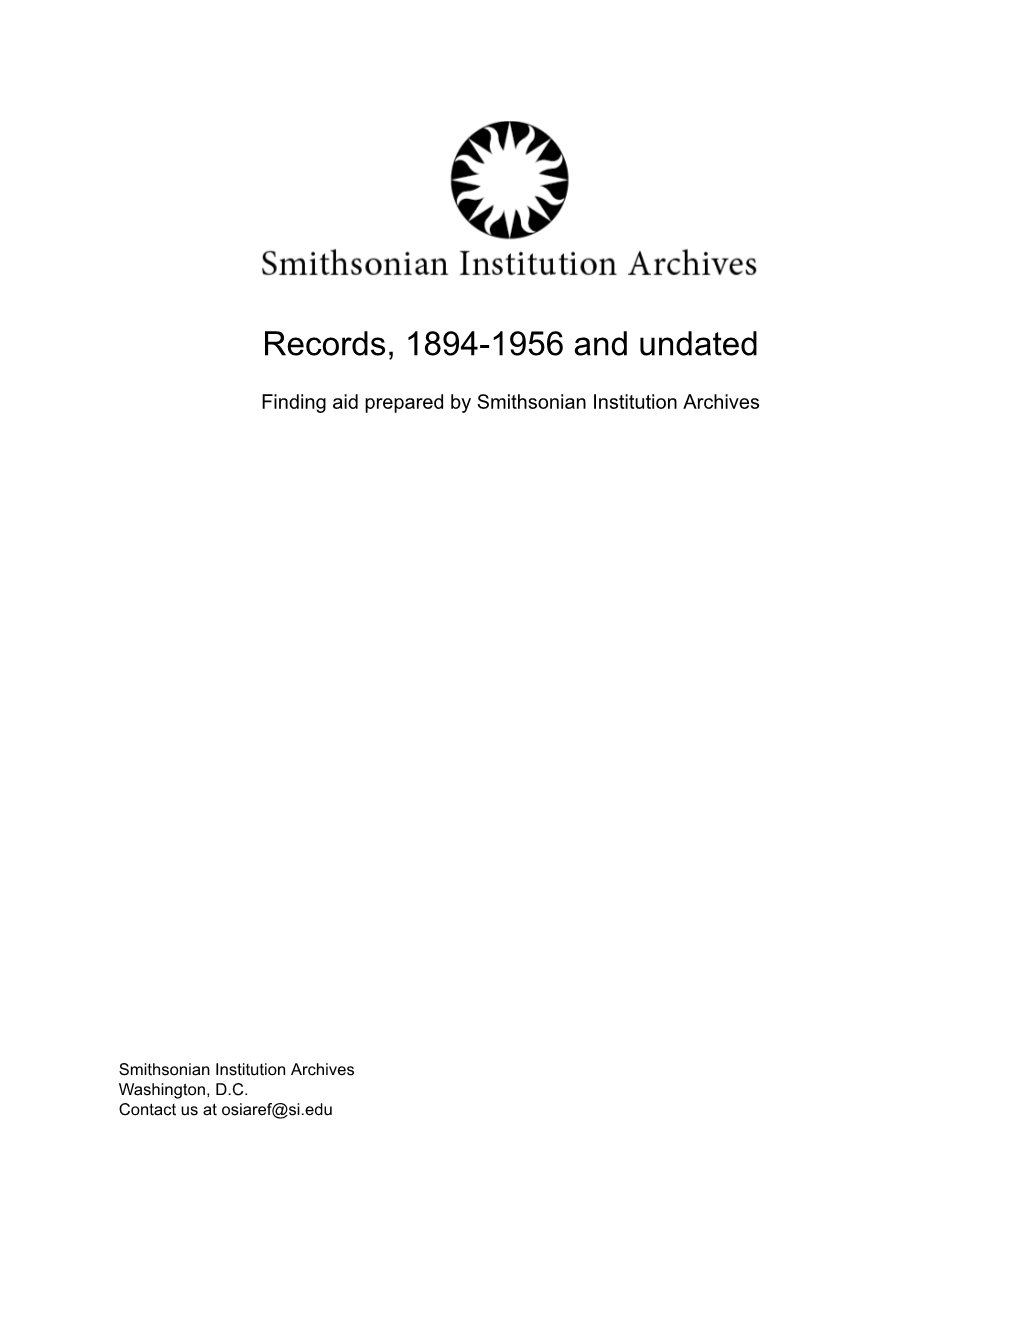 Records, 1894-1956 and Undated